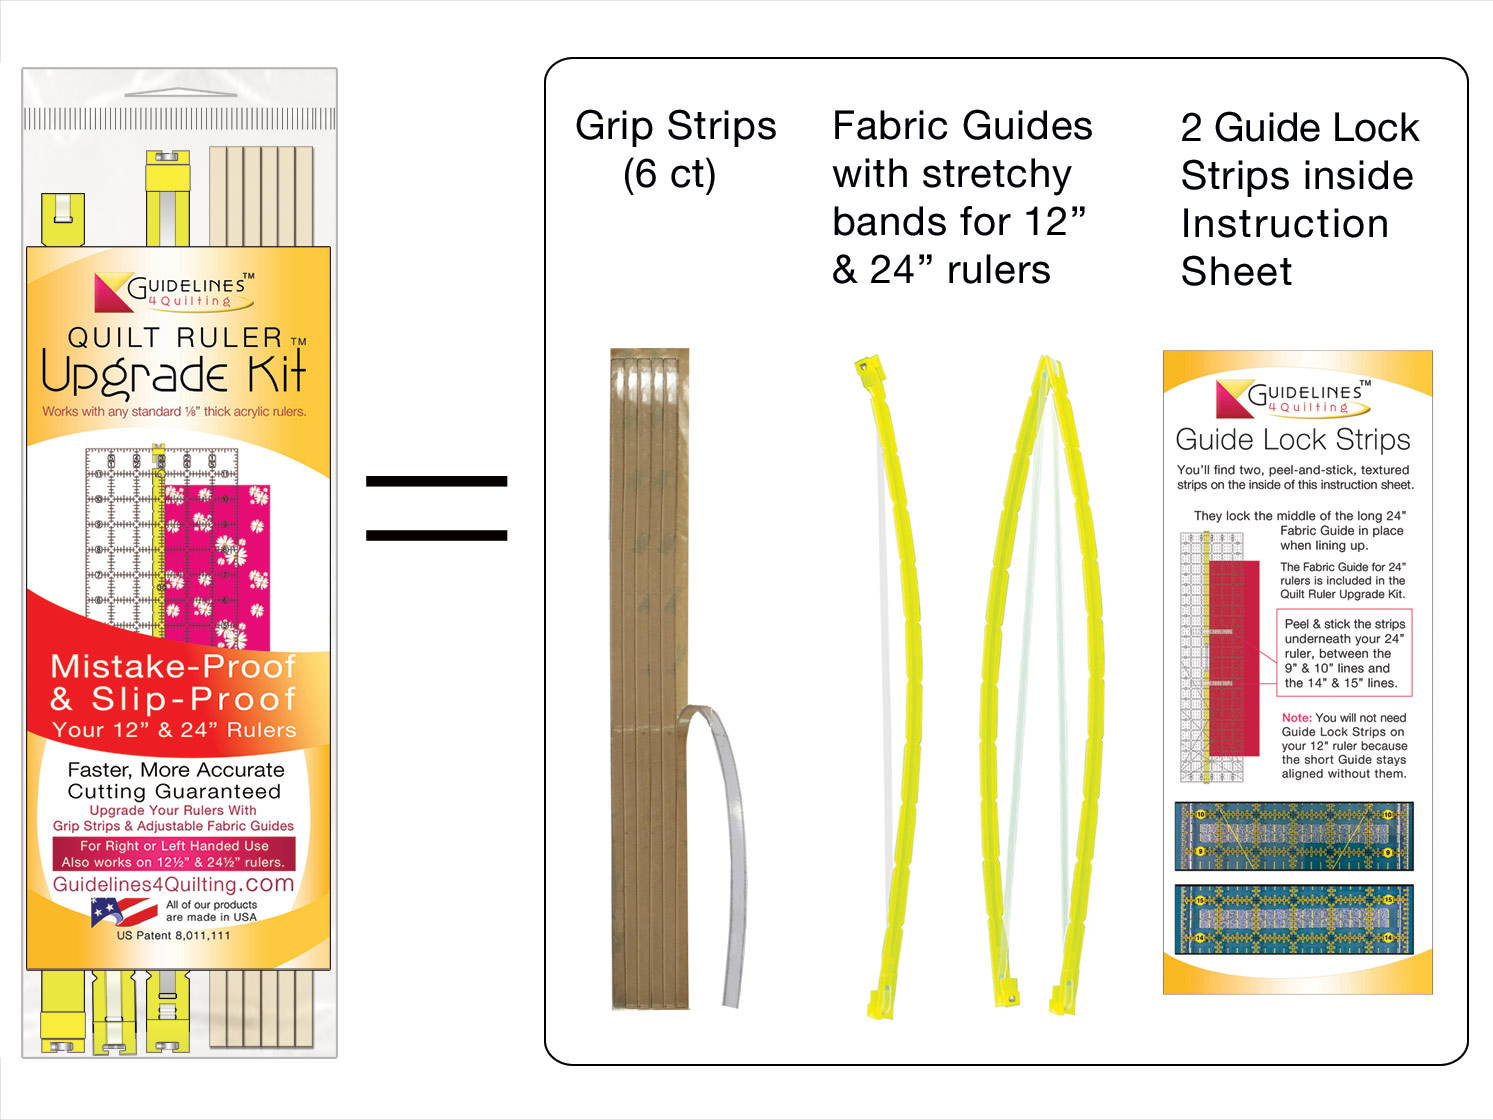 Quilt Ruler Upgrade Kit Contents